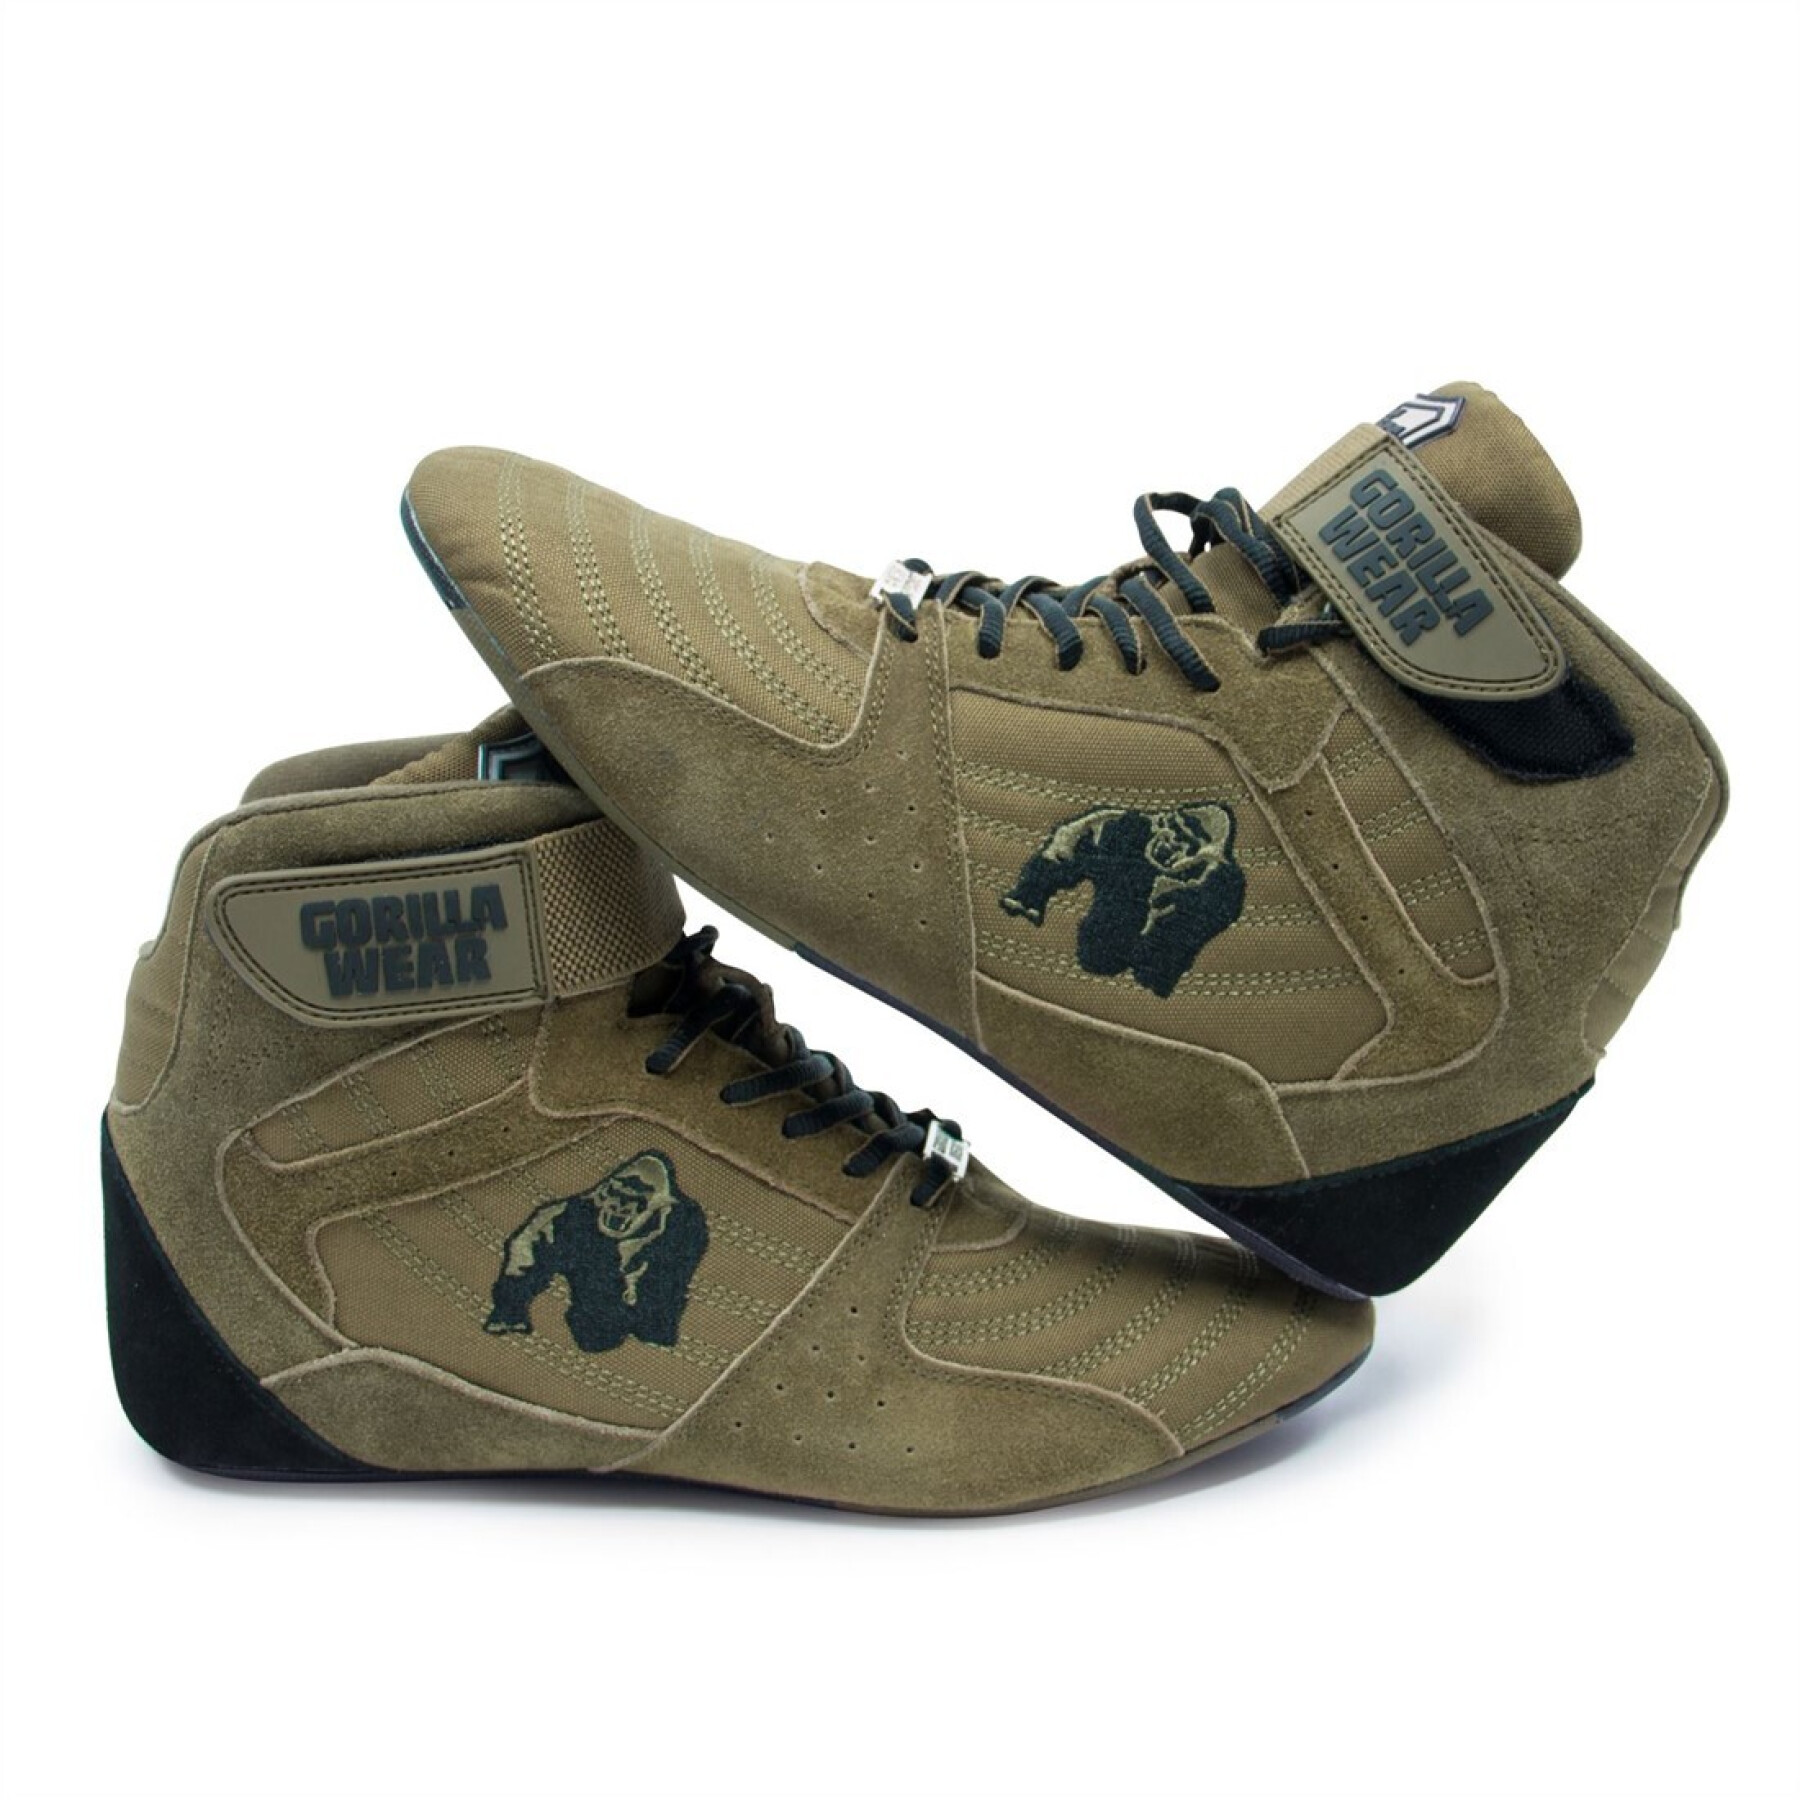 Training shoes Gorilla Wear Perry Pro